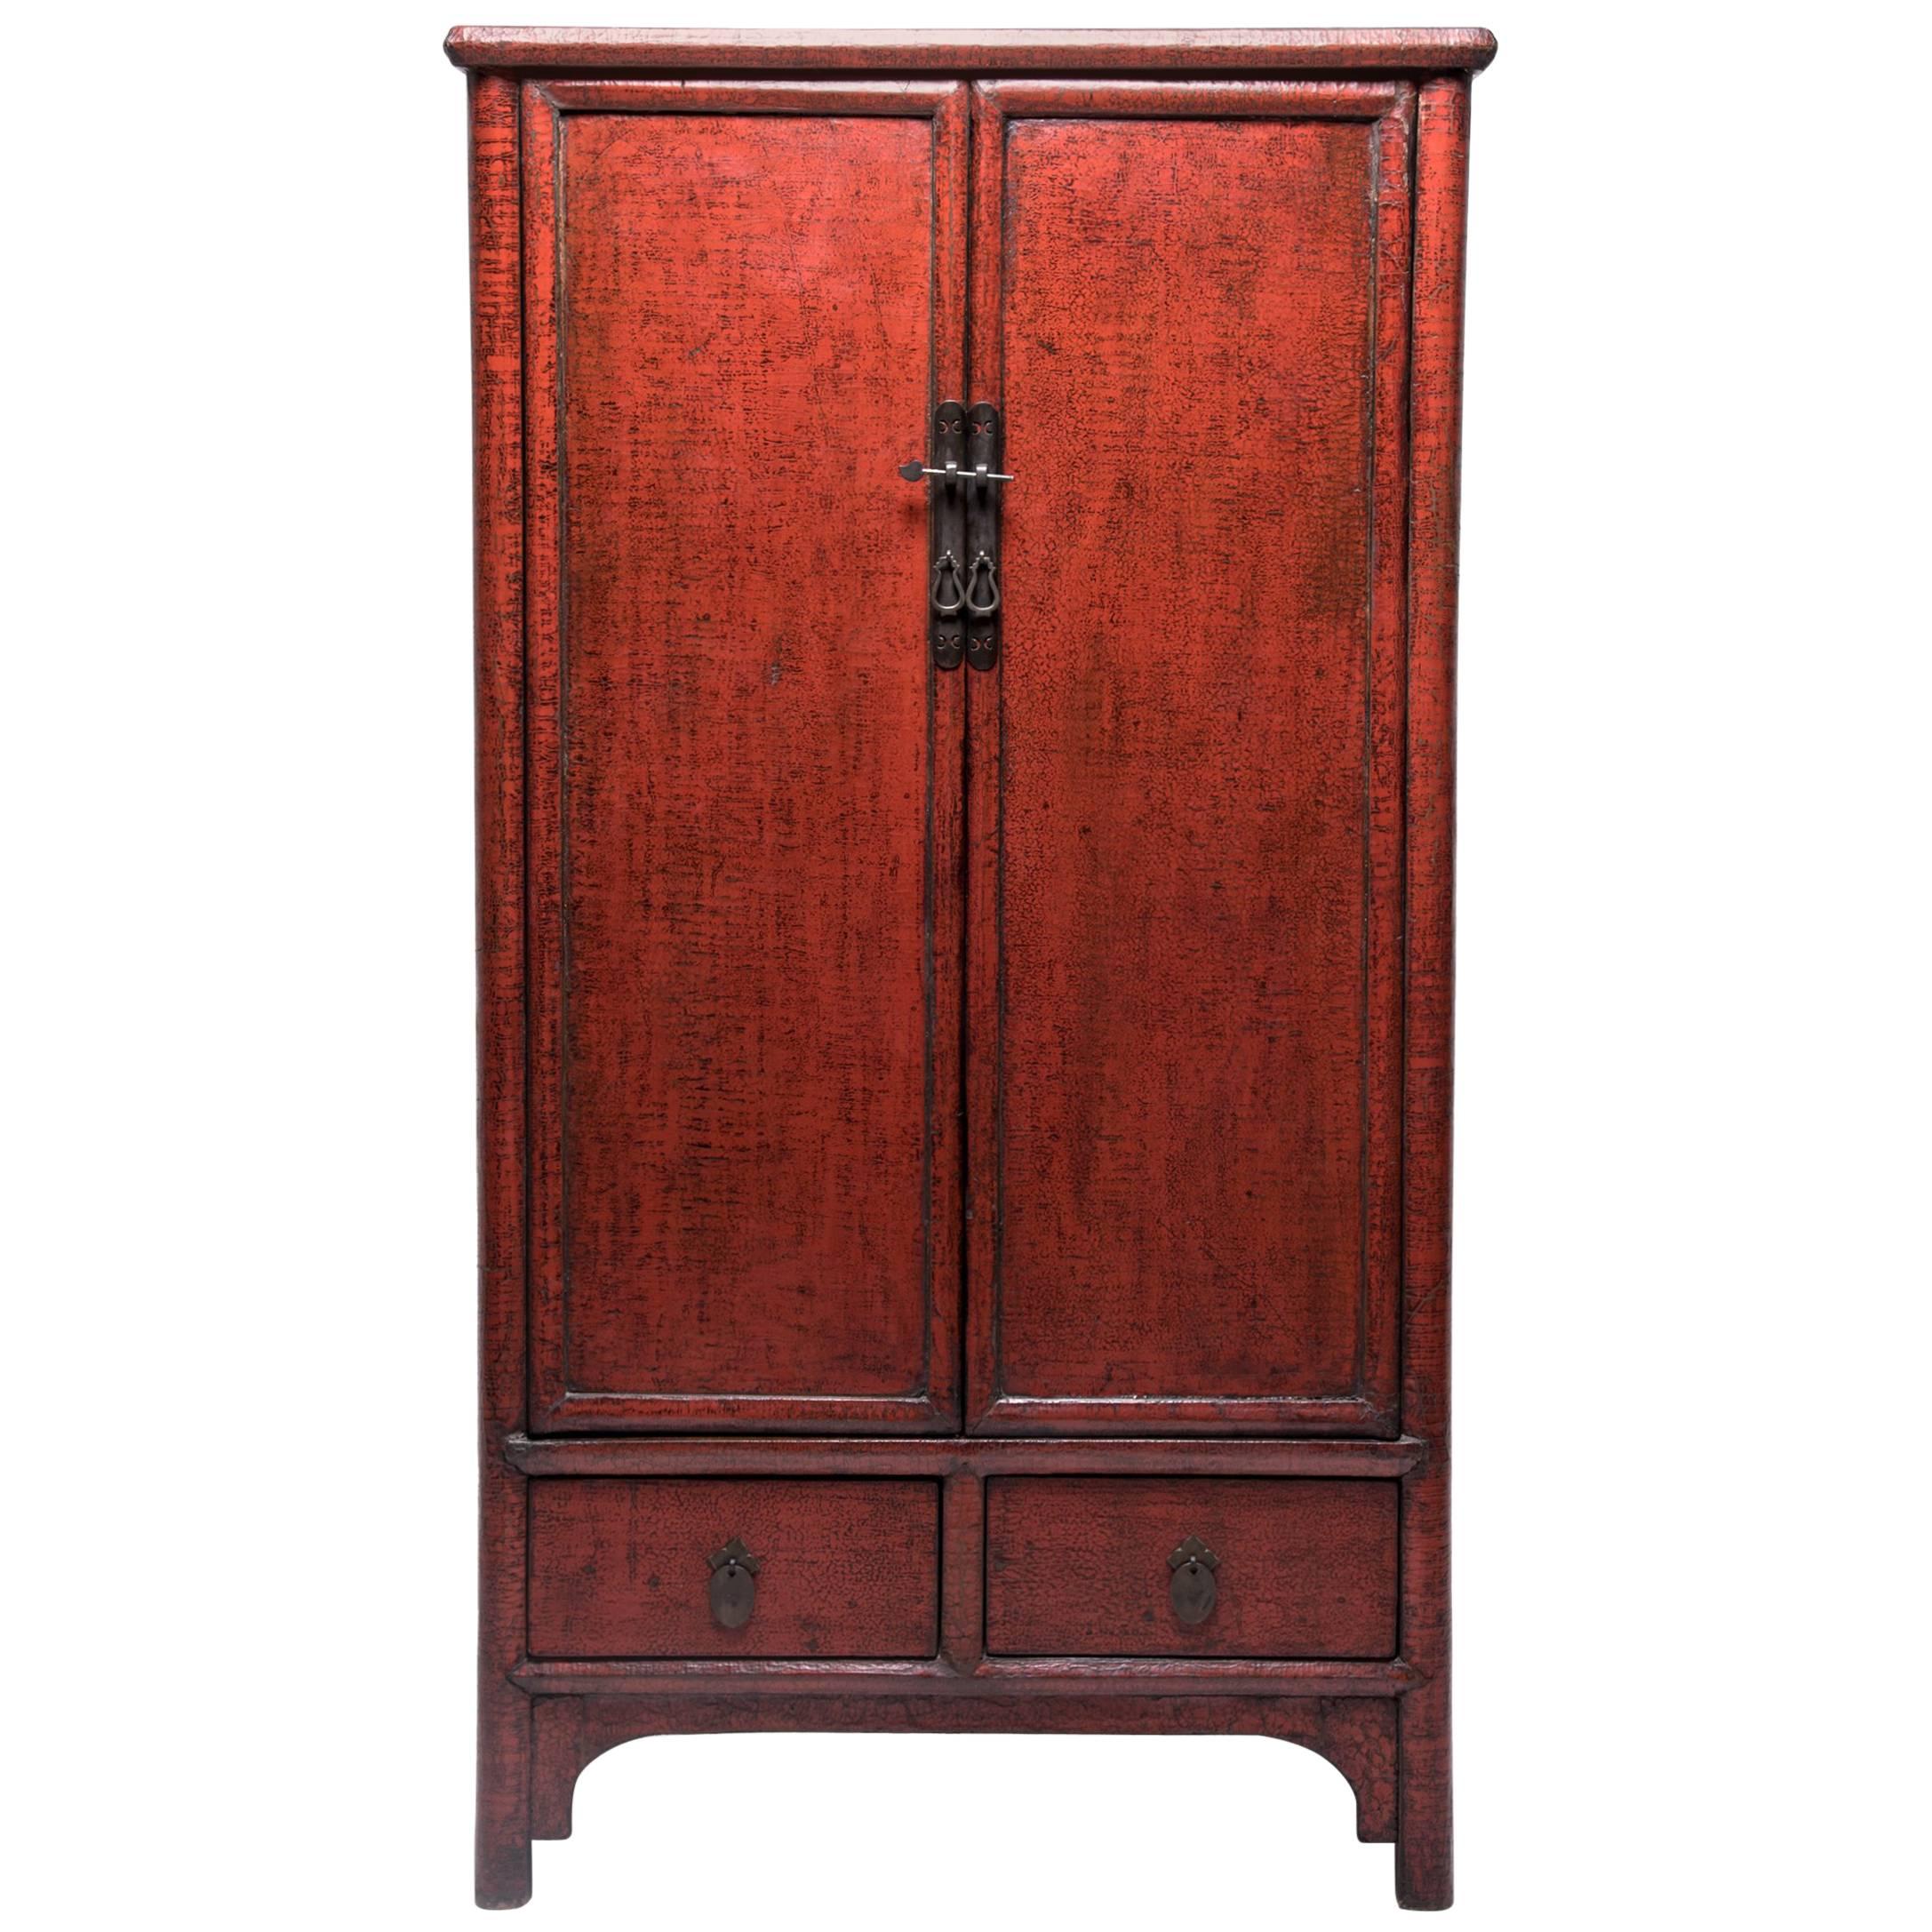 19th Century Chinese Crimson Crackle Lacquered Cabinet